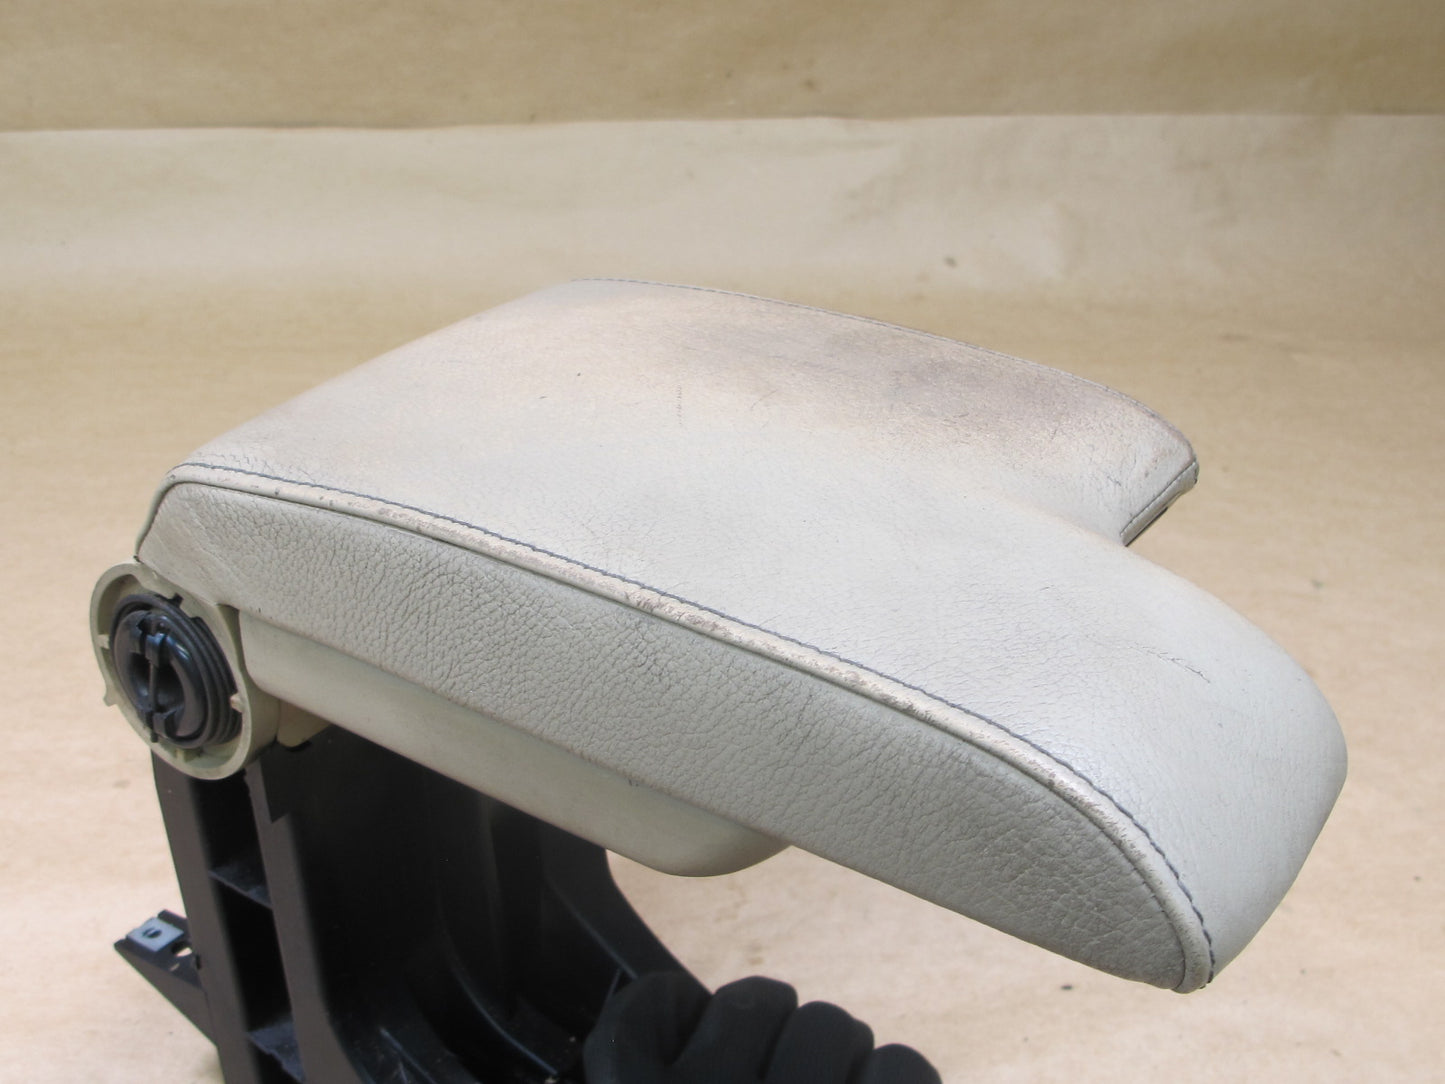 01-06 BMW E46 3-SERIES CENTER CONSOLE LEATHER ARMREST LID COVER OEM